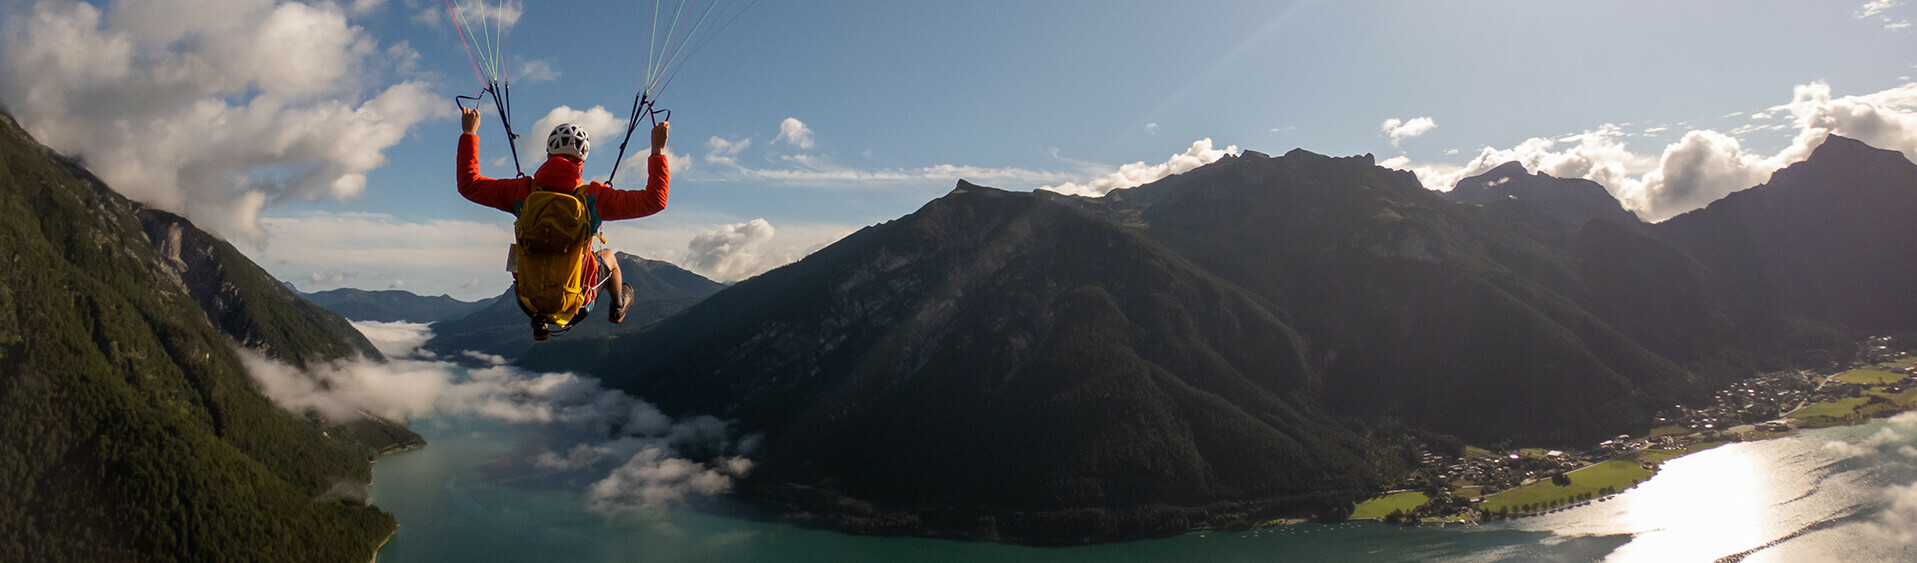 A paragliding adventure lets you enjoy incredible views of the lake and the mountains.